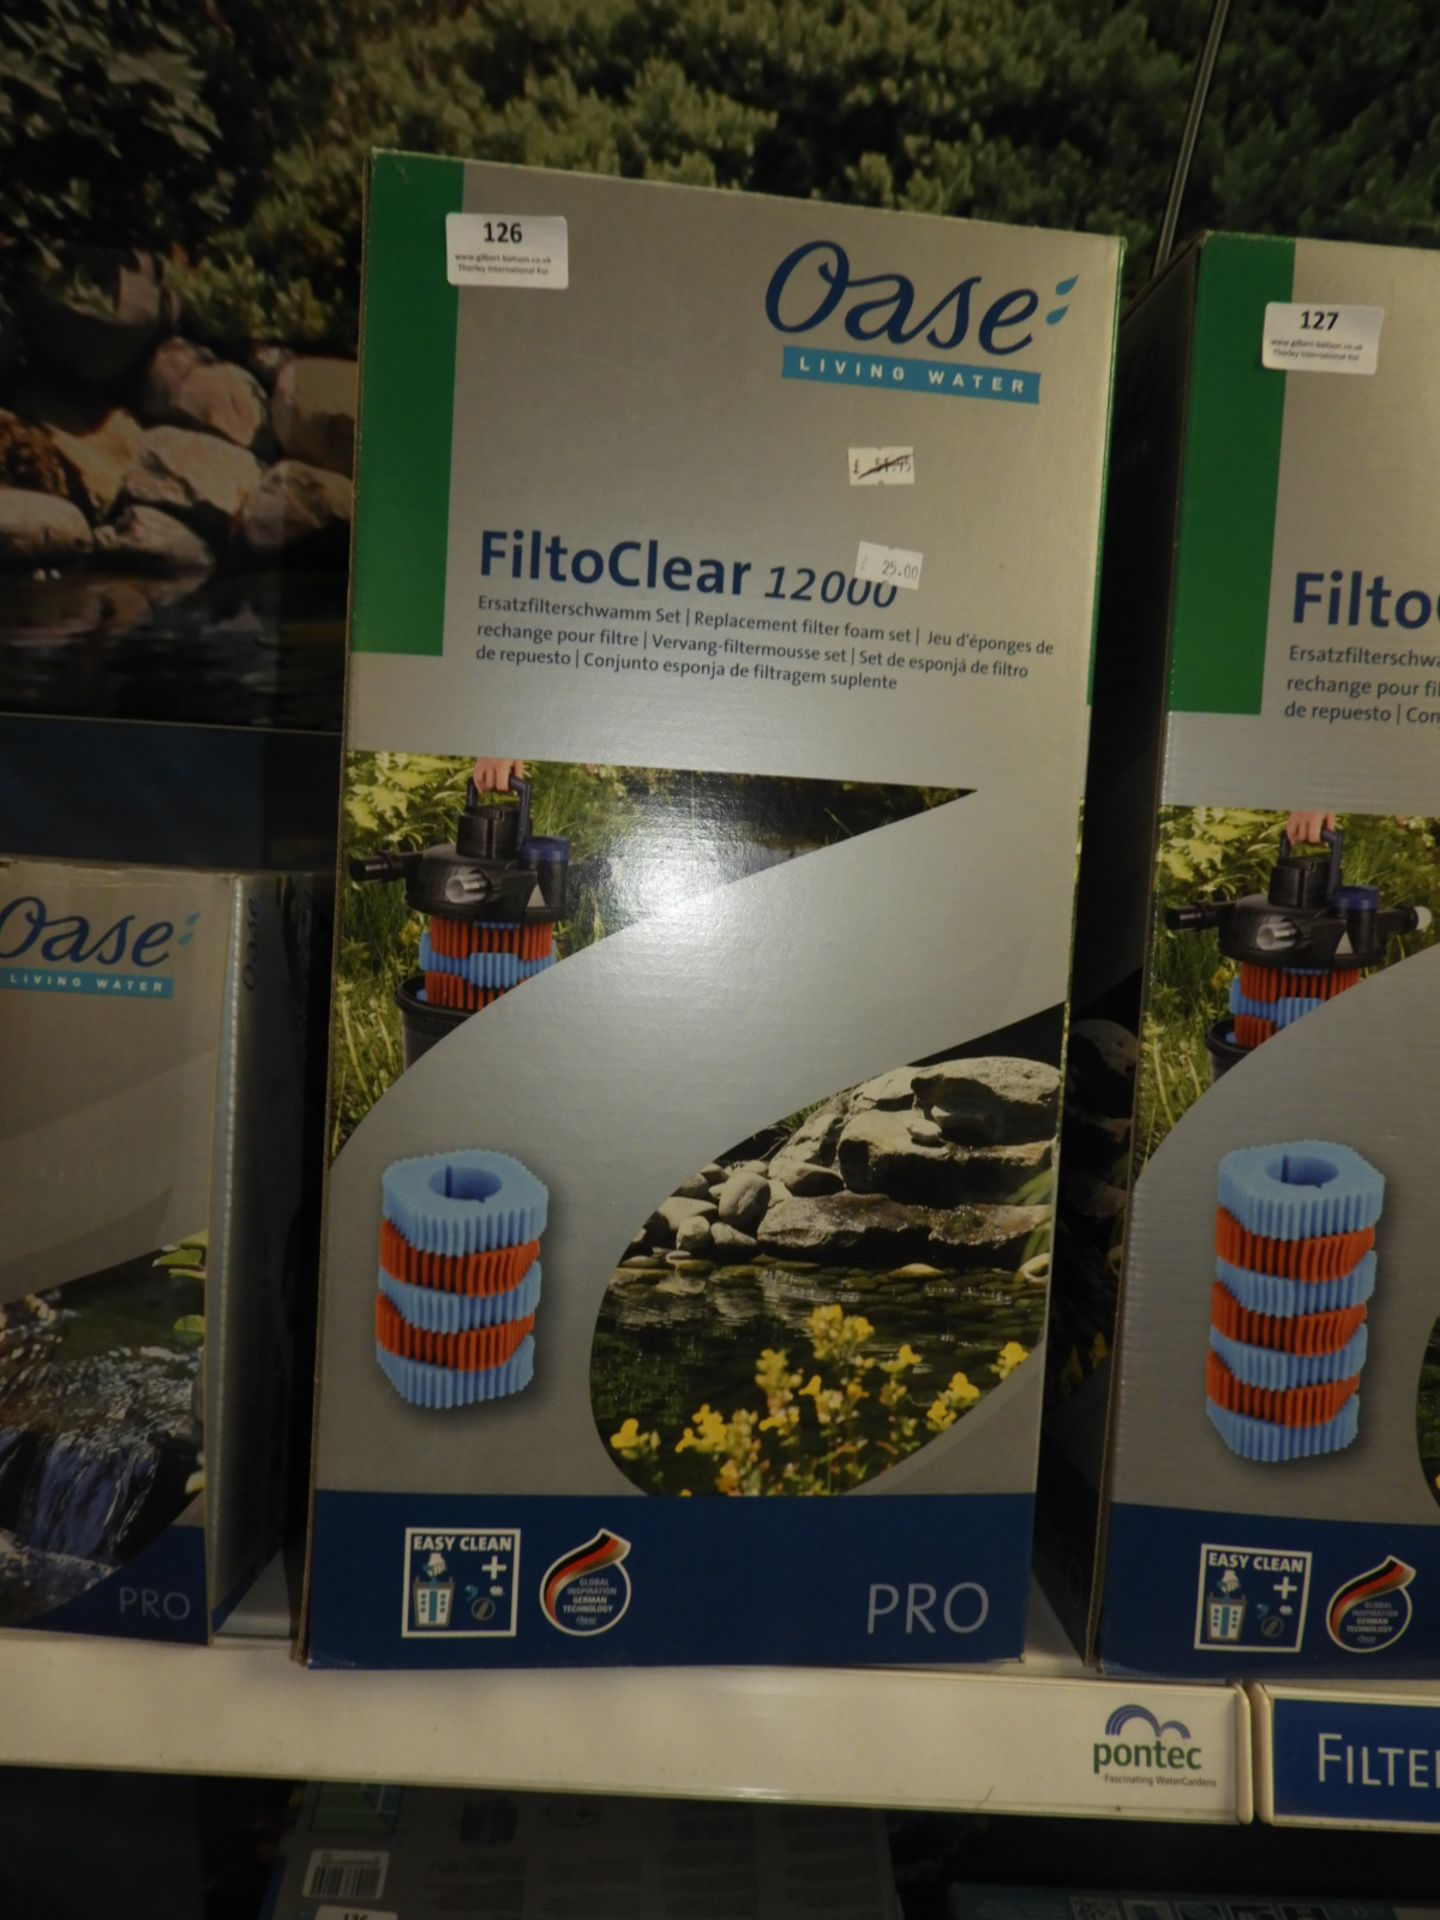 *Oase FiltoClear 12000 Pond Filter